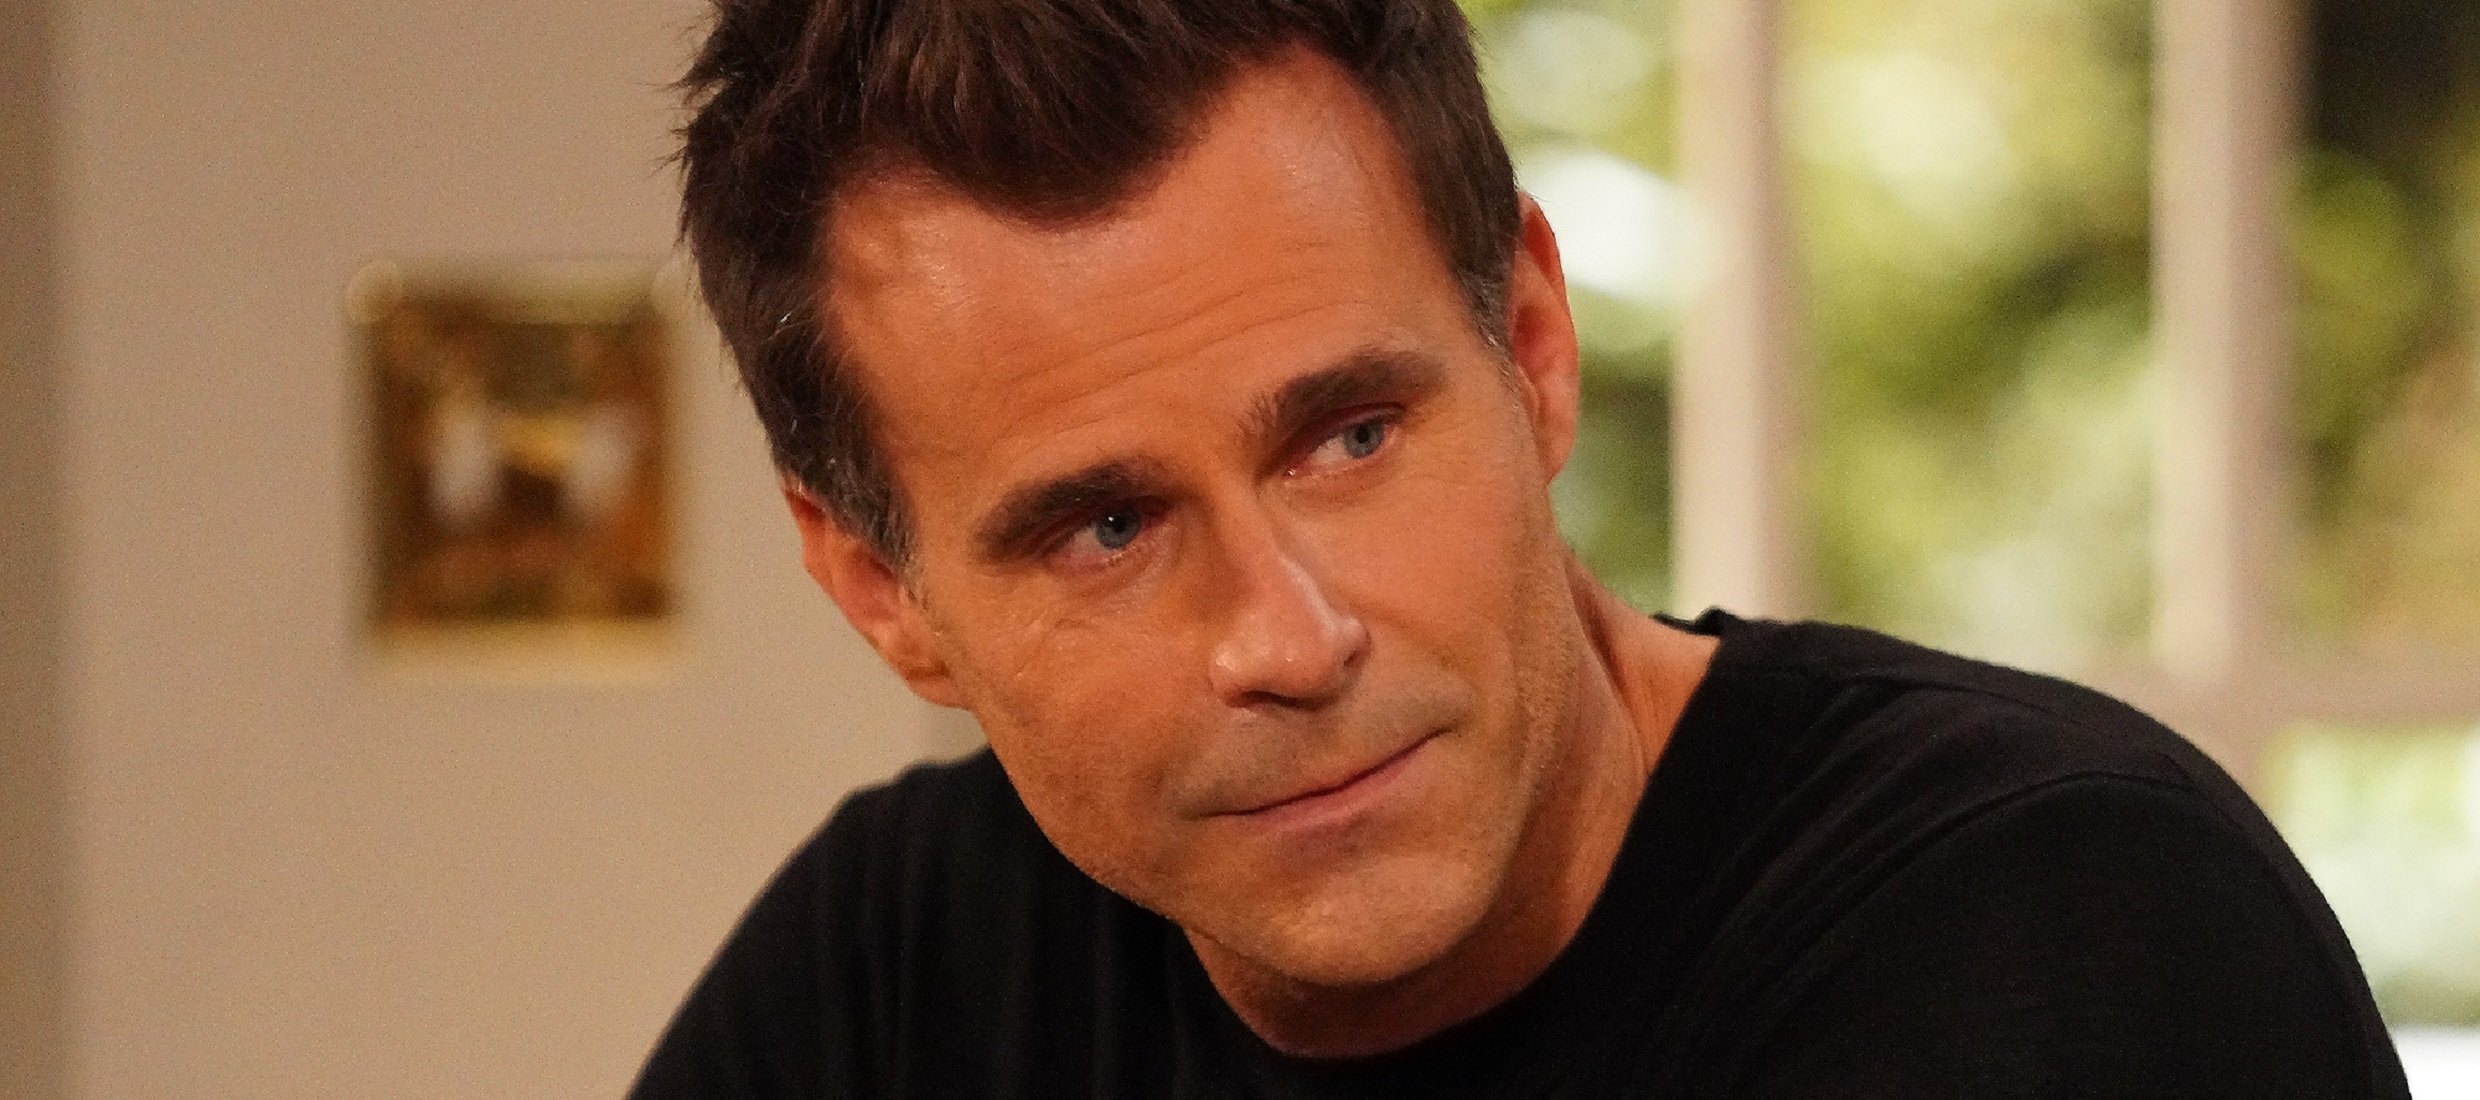 General Hospital star Cameron Mathison, pictured here in a black shirt, is one of the many actors negatively affected by this production delay